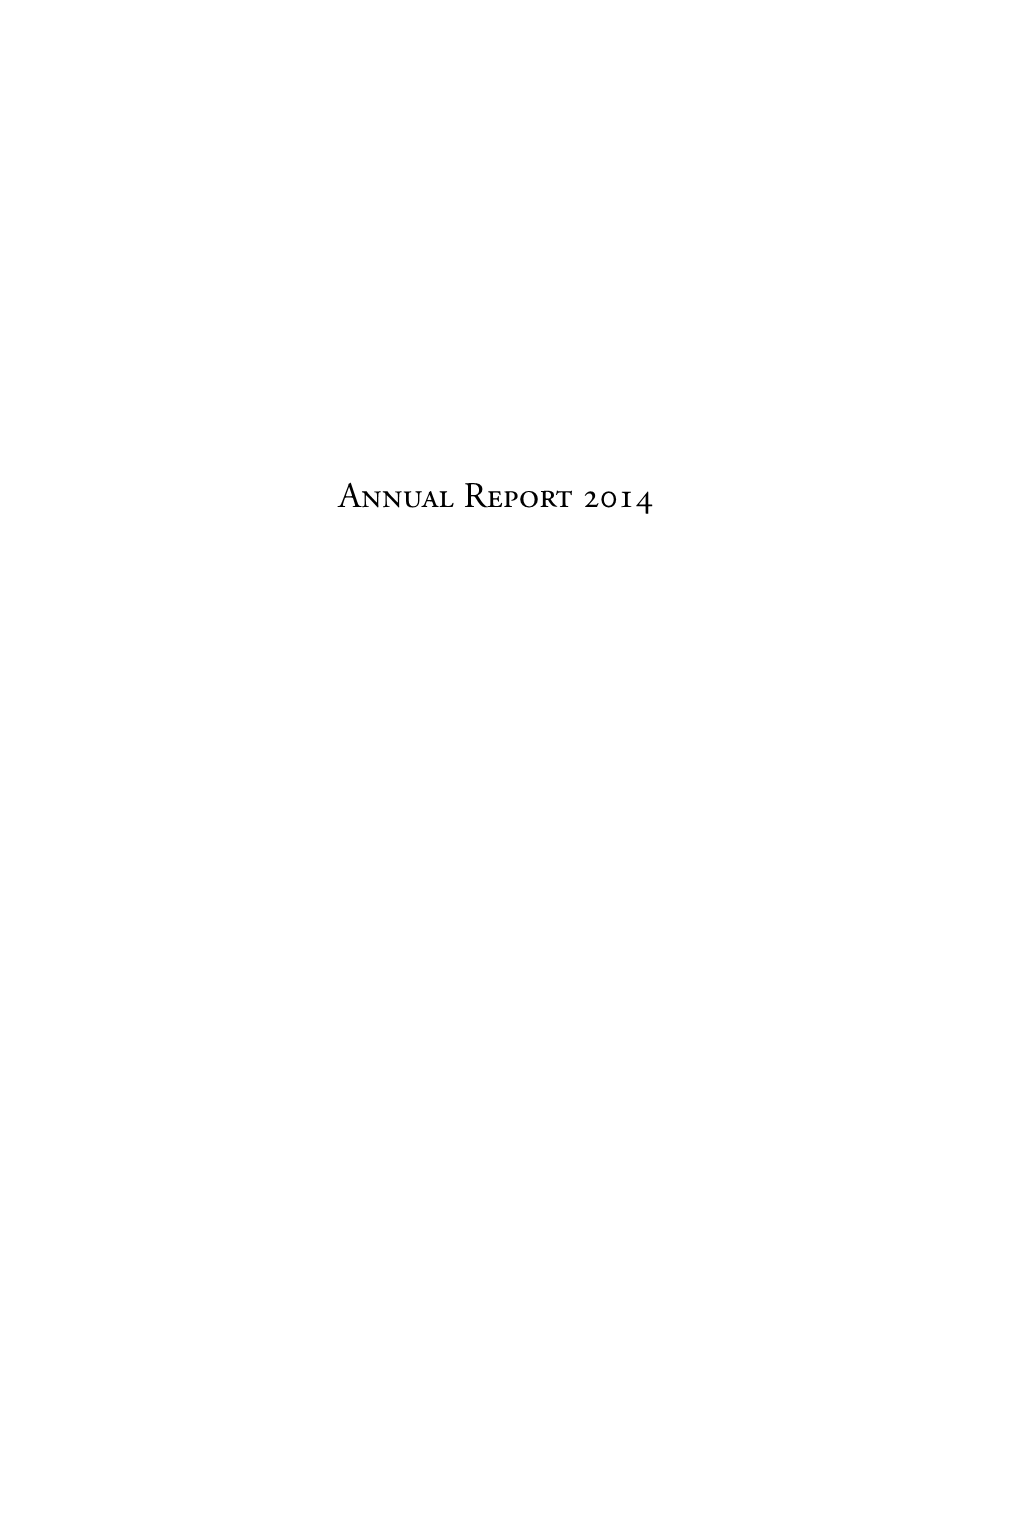 Annual Report 2014 of the European Court of Human Rights, Council of Europe”